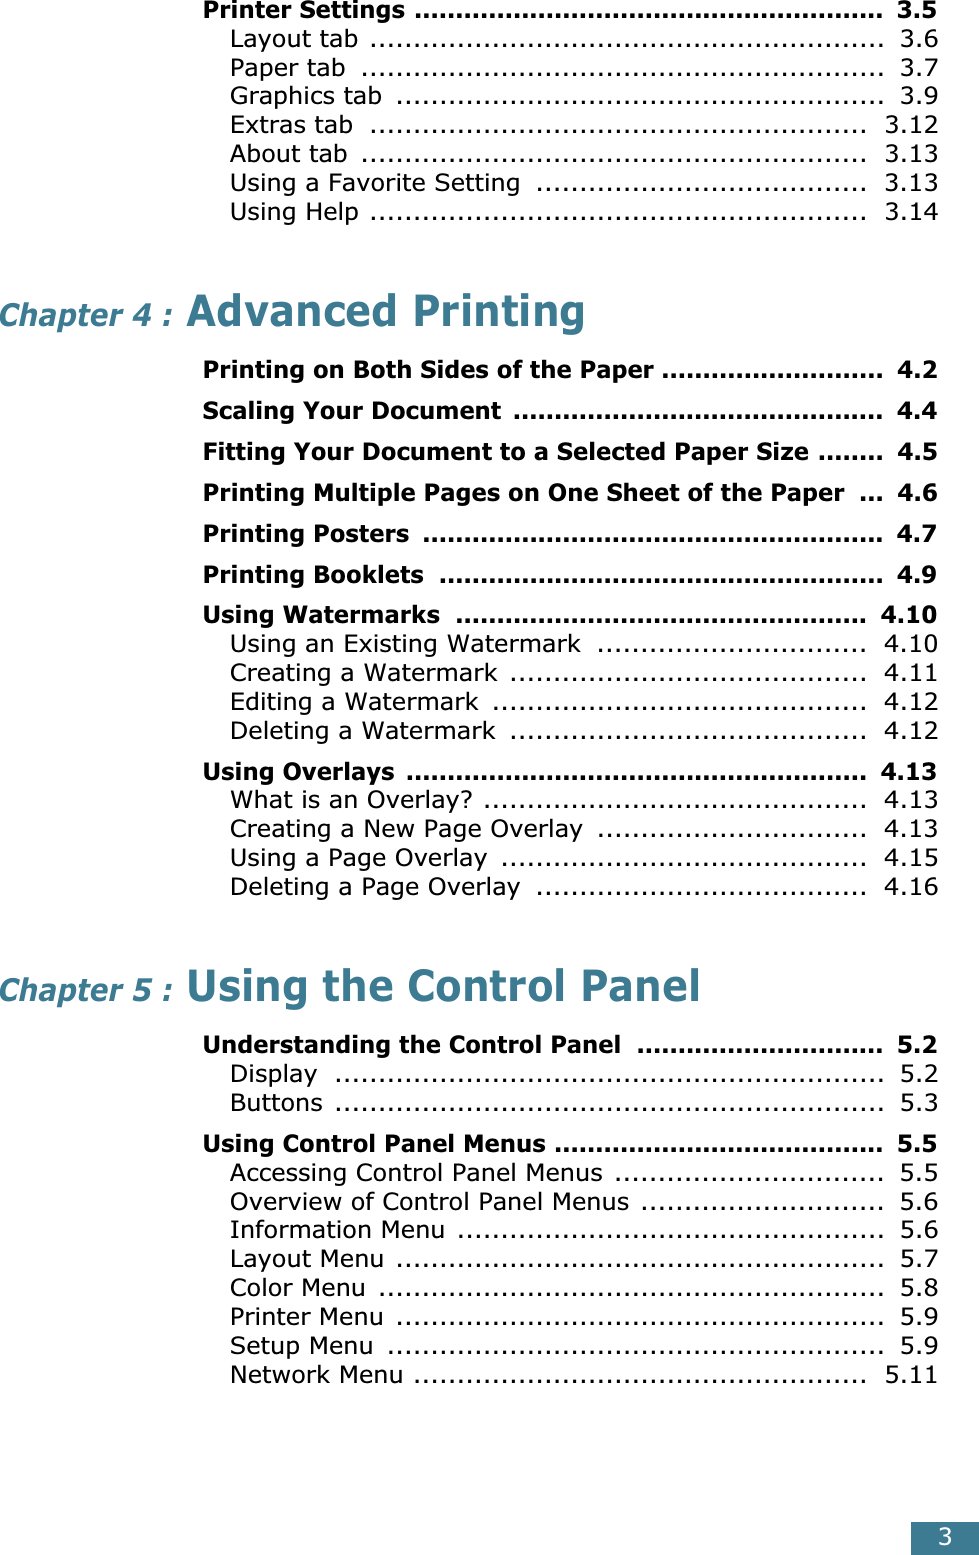  3 Printer Settings .........................................................  3.5 Layout tab ...........................................................  3.6Paper tab  ............................................................  3.7Graphics tab  ........................................................  3.9Extras tab  .........................................................  3.12About tab  ..........................................................  3.13Using a Favorite Setting  ......................................  3.13Using Help .........................................................  3.14 Chapter 4 :  Advanced Printing Printing on Both Sides of the Paper ...........................  4.2Scaling Your Document  .............................................  4.4Fitting Your Document to a Selected Paper Size ........  4.5Printing Multiple Pages on One Sheet of the Paper  ...  4.6Printing Posters  ........................................................  4.7Printing Booklets  ......................................................  4.9Using Watermarks  ..................................................  4.10 Using an Existing Watermark  ...............................  4.10Creating a Watermark .........................................  4.11Editing a Watermark  ...........................................  4.12Deleting a Watermark  .........................................  4.12 Using Overlays  ........................................................  4.13 What is an Overlay? ............................................  4.13Creating a New Page Overlay  ...............................  4.13Using a Page Overlay  ..........................................  4.15Deleting a Page Overlay  ......................................  4.16 Chapter 5 :  Using the Control Panel Understanding the Control Panel  ..............................  5.2 Display ...............................................................  5.2Buttons ...............................................................  5.3 Using Control Panel Menus ........................................  5.5 Accessing Control Panel Menus ...............................  5.5Overview of Control Panel Menus ............................  5.6Information Menu .................................................  5.6Layout Menu ........................................................  5.7Color Menu  ..........................................................  5.8Printer Menu ........................................................  5.9Setup Menu  .........................................................  5.9Network Menu ....................................................  5.11